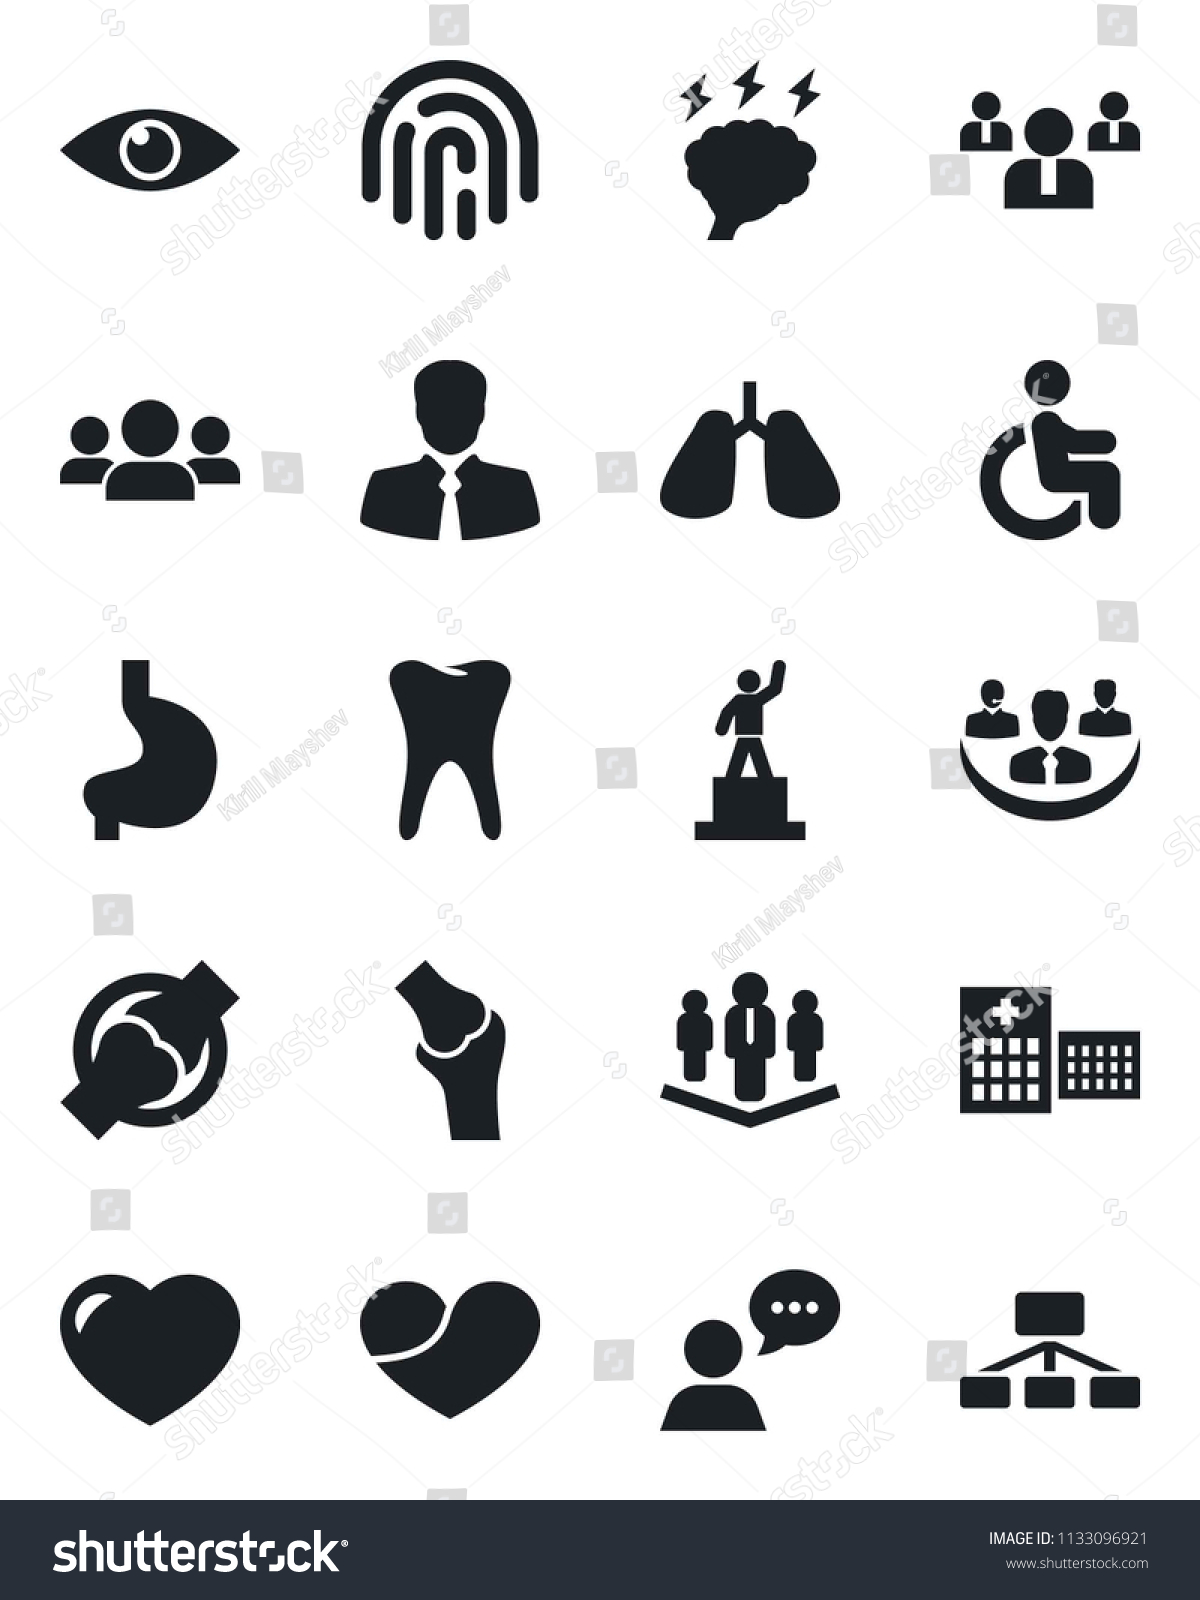 Set of vector isolated black icon - pedestal vector, team, brainstorm, disabled, stomach, lungs, tooth, eye, joint, hospital, client, speaker, heart, fingerprint id, company, group, hierarchy #1133096921